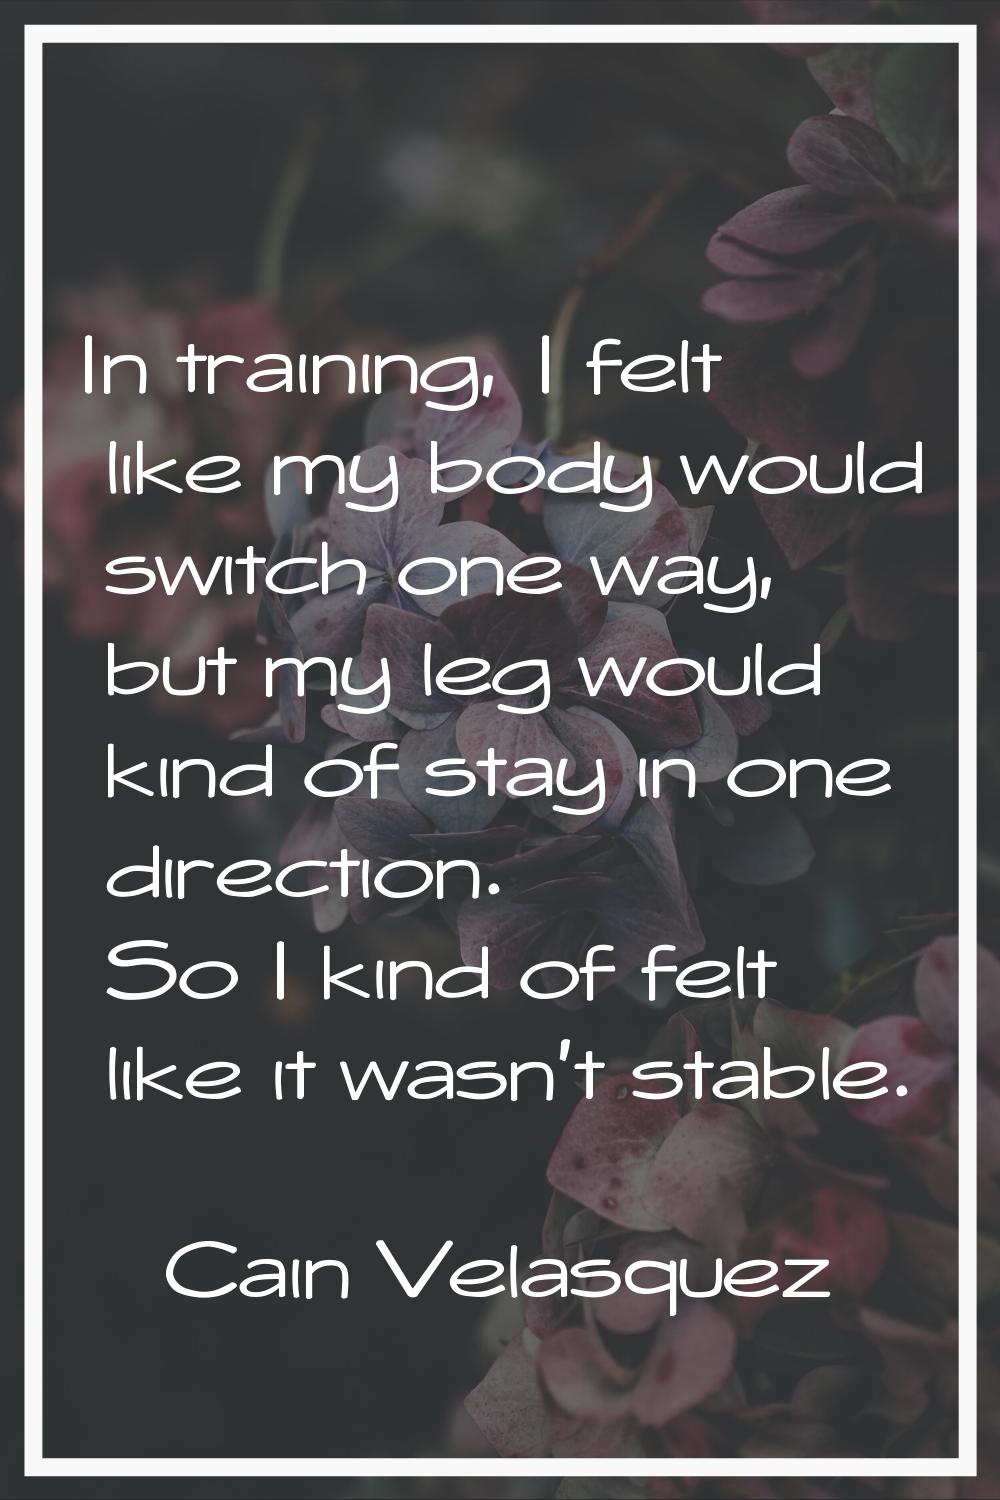 In training, I felt like my body would switch one way, but my leg would kind of stay in one directi